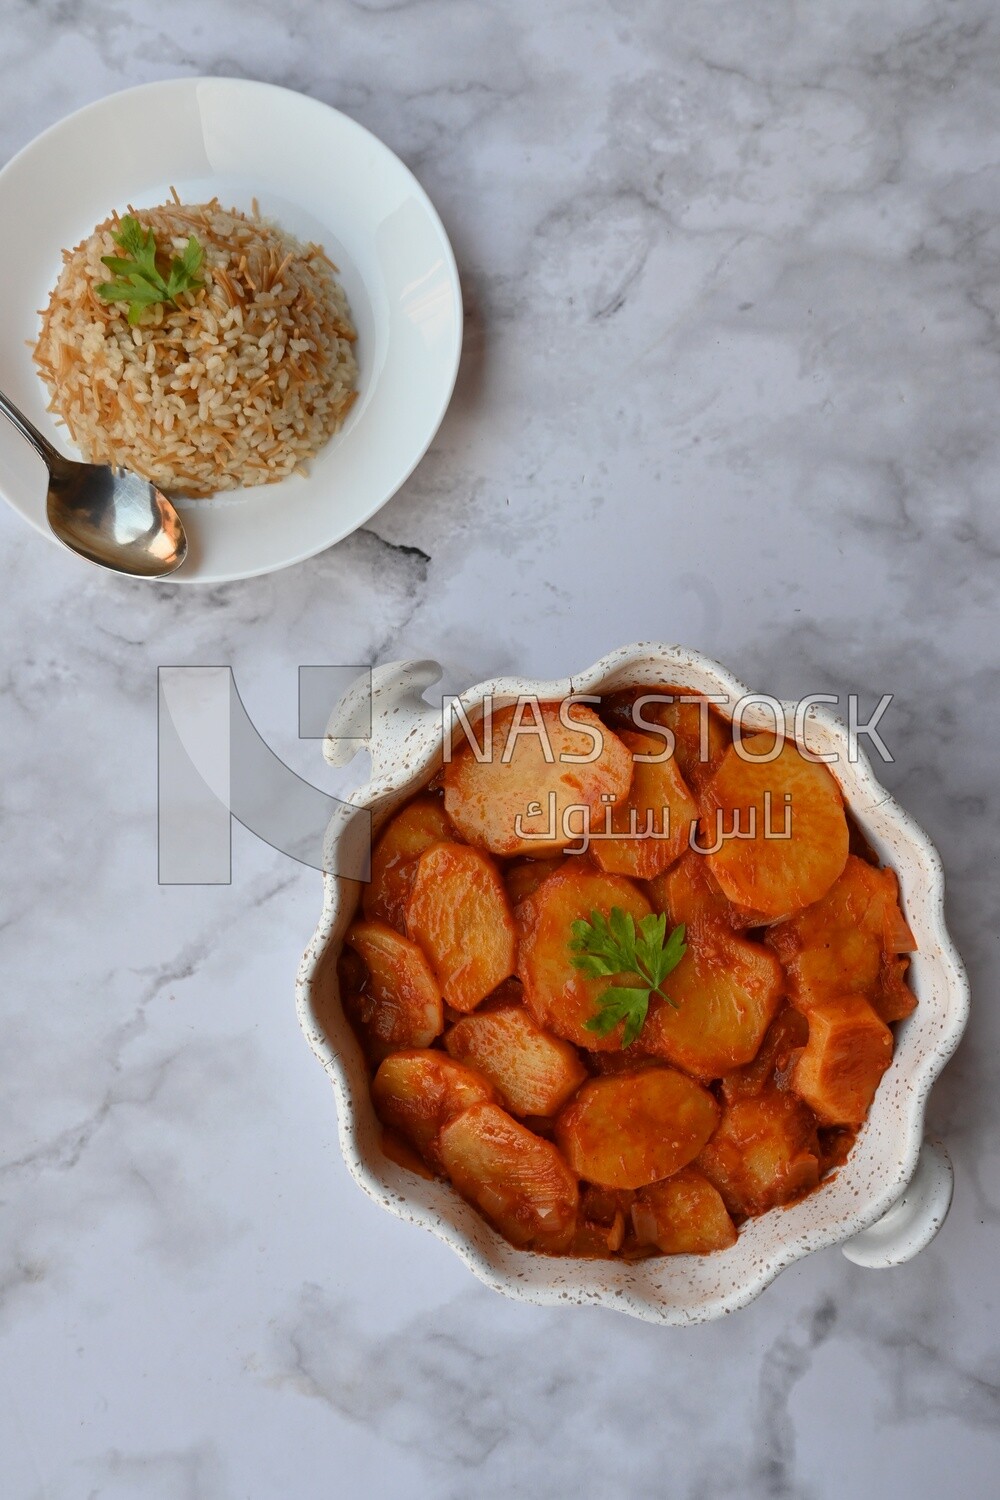 Potato tray sits beside a plate of rice